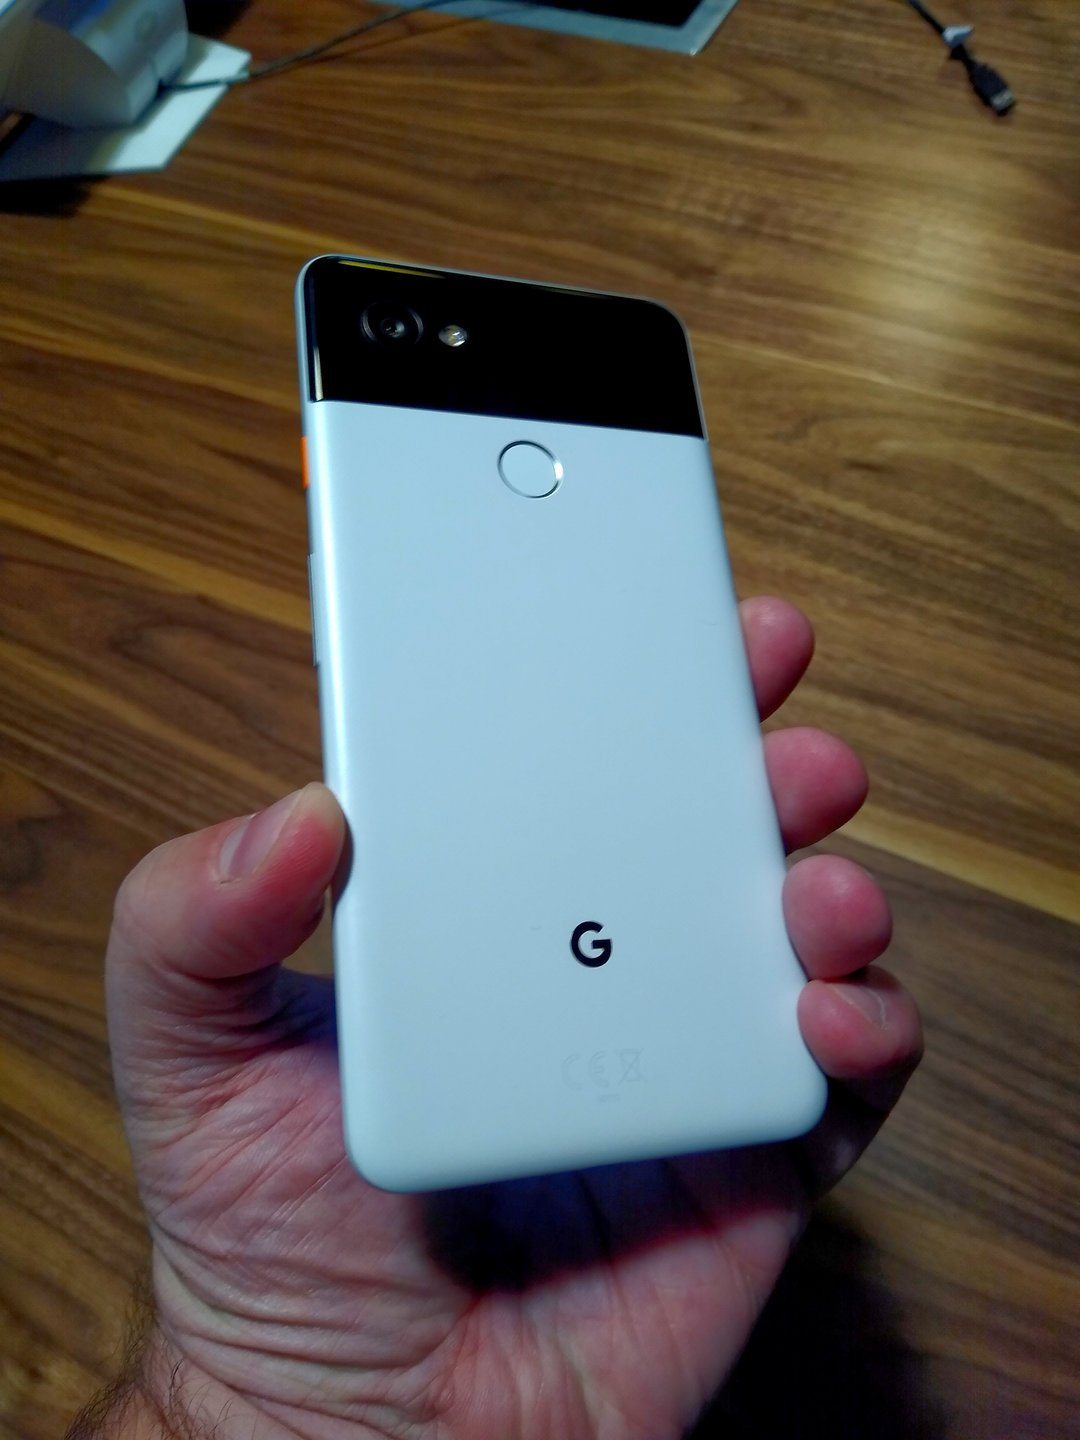 Google Pixel 2 Xl In 2019 - Why?